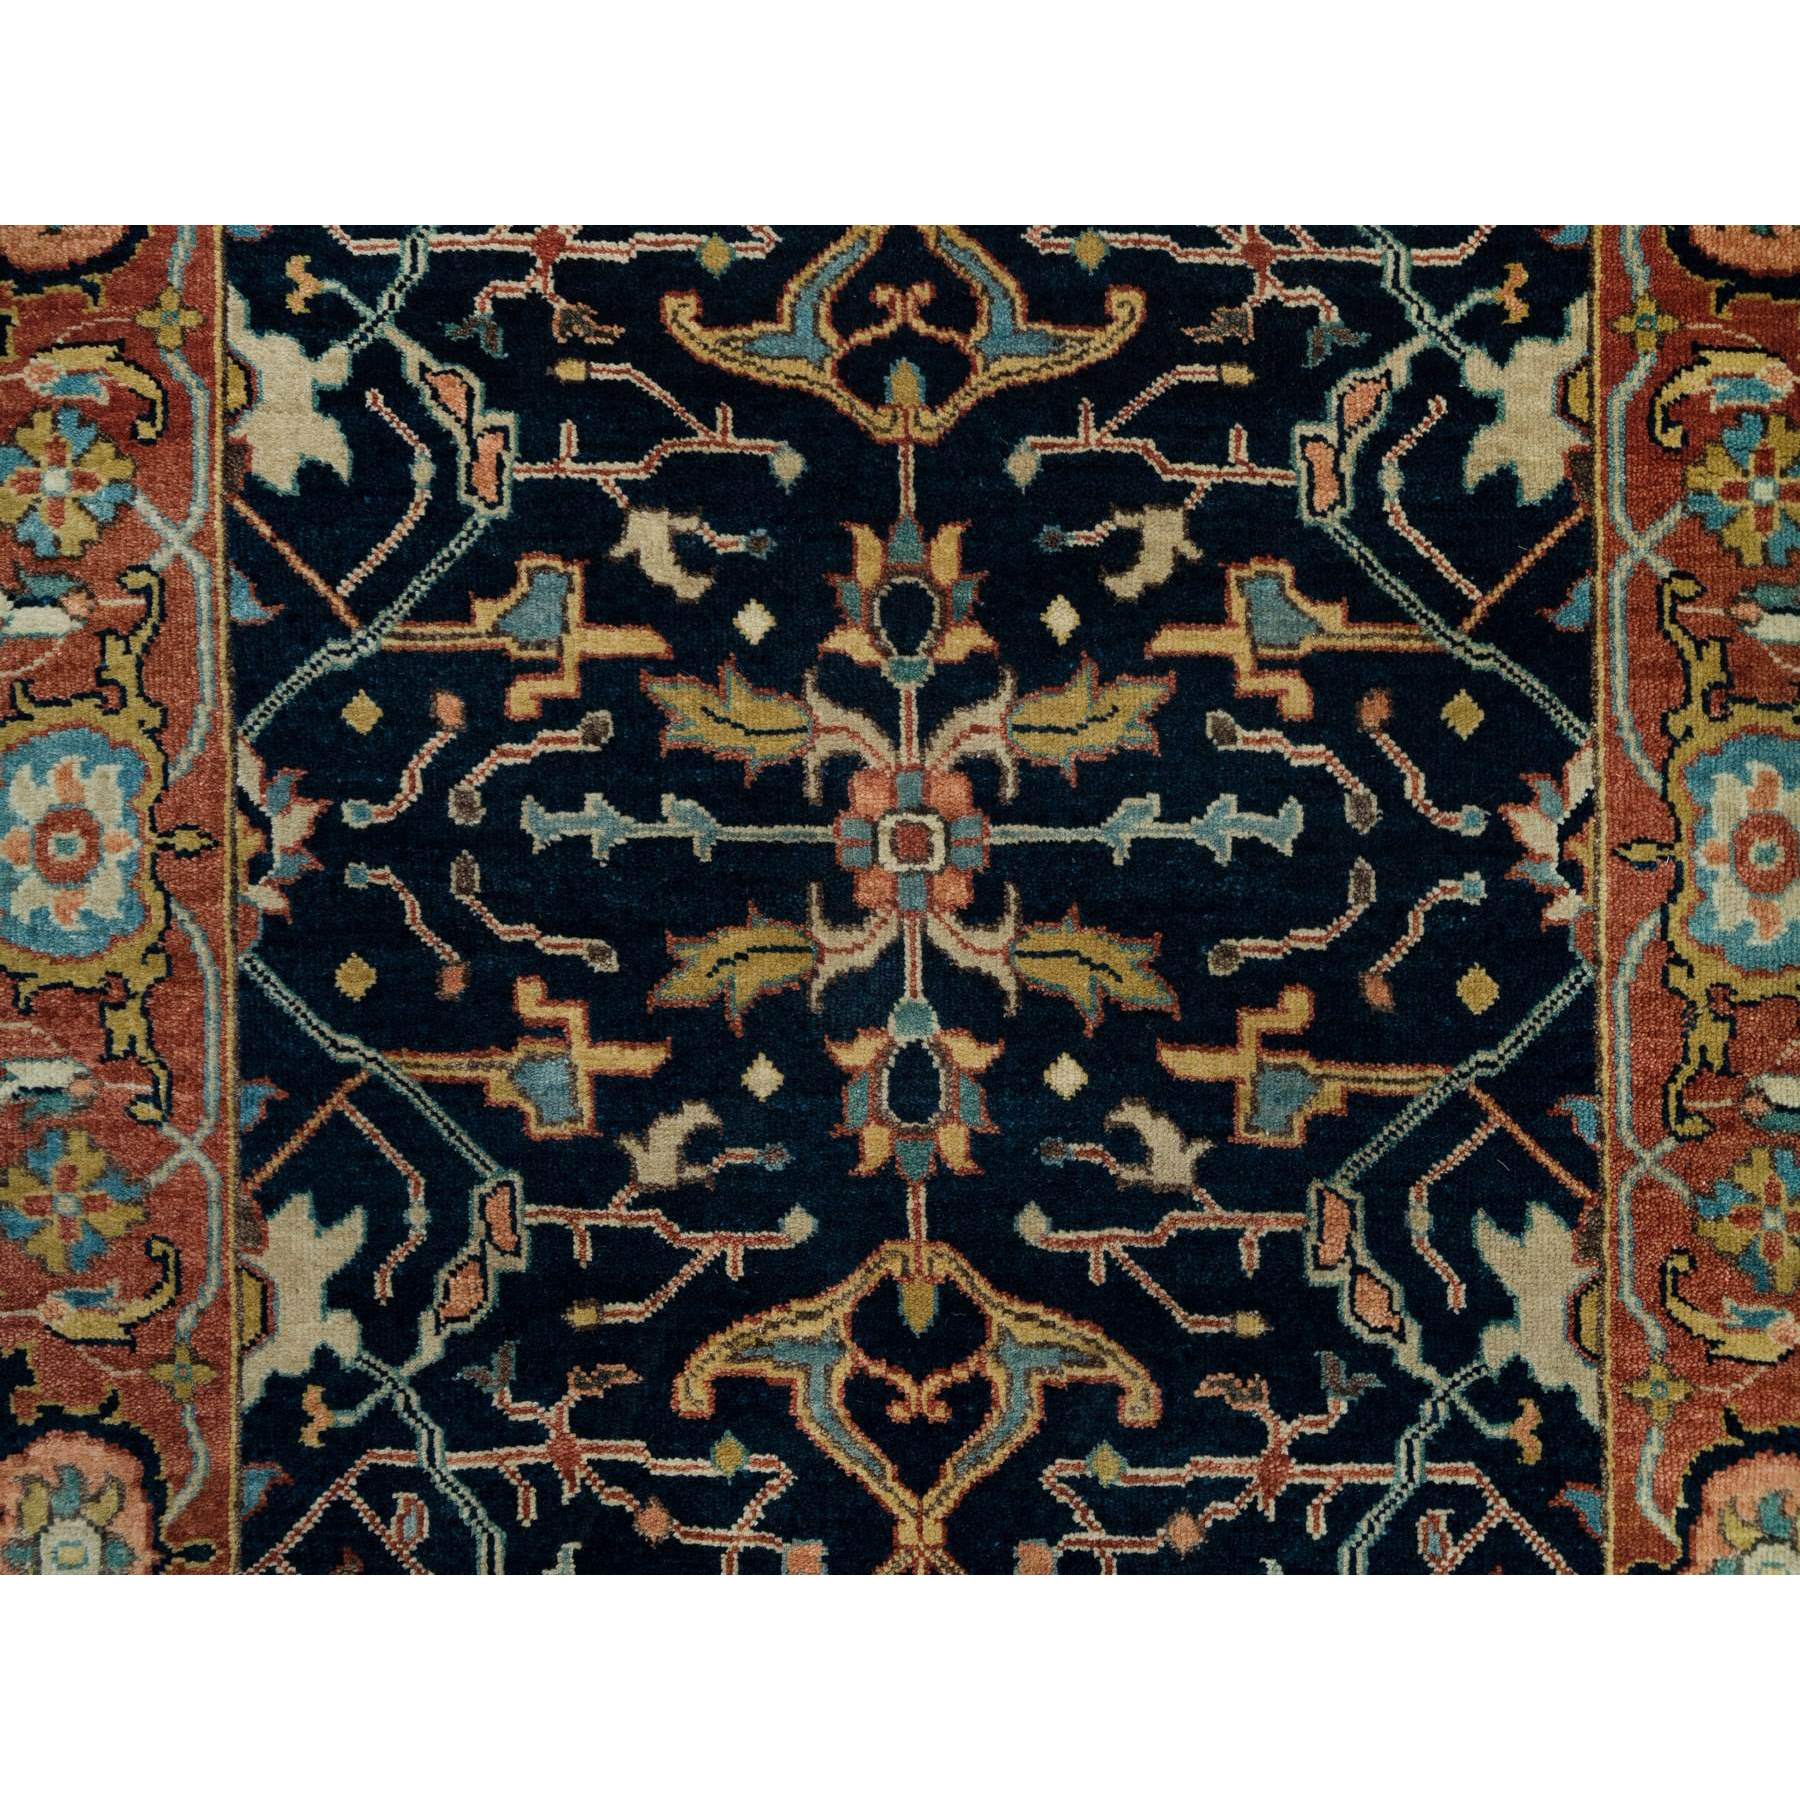 3'1"x5'2" Millennium Blue, Hand Woven Antiqued Fine Heriz Re-Creation Densely Woven, Natural Dyes 100% Wool, Soft Pile, Oriental Rug 